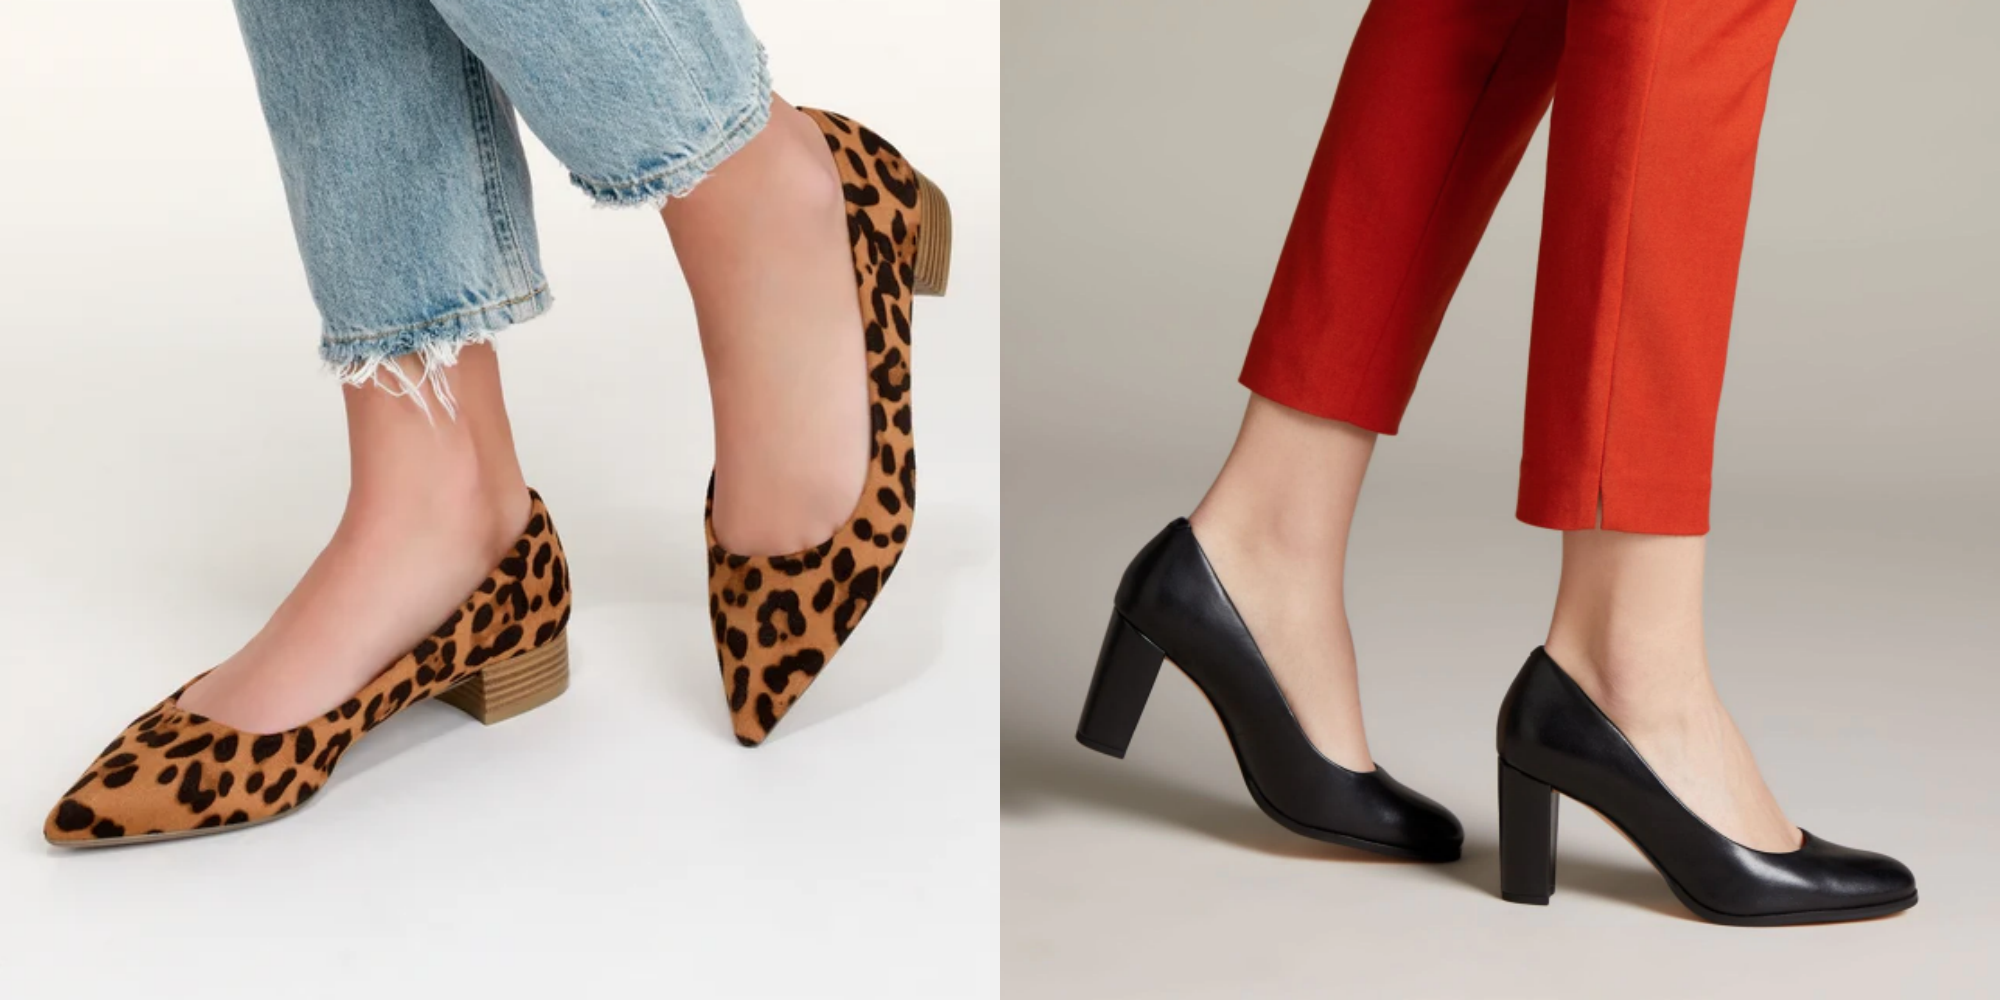 15 Most Comfortable Heels to Strut Your Stuff In